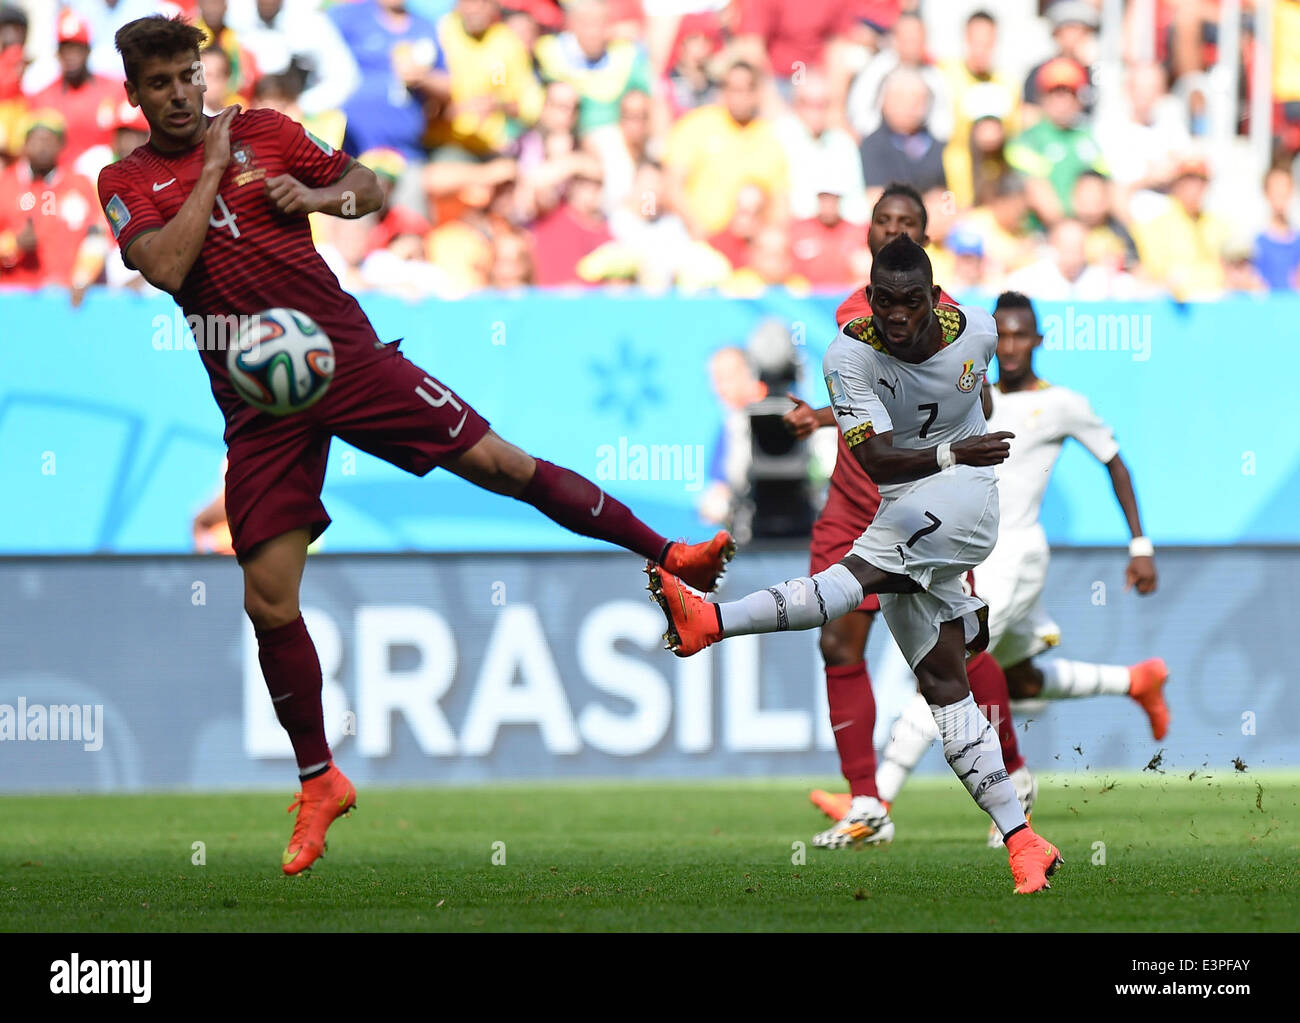 Brasilia, Brazil. 26th June, 2014. Portugal's Miguel Veloso (L) fails to block the shot by Ghana's Christian Atsu during a Group G match between Portugal and Ghana of 2014 FIFA World Cup at the Estadio Nacional Stadium in Brasilia, Brazil, June 26, 2014. Portugal won 2-1 over Ghana on Thursday. © Qi Heng/Xinhua/Alamy Live News Stock Photo